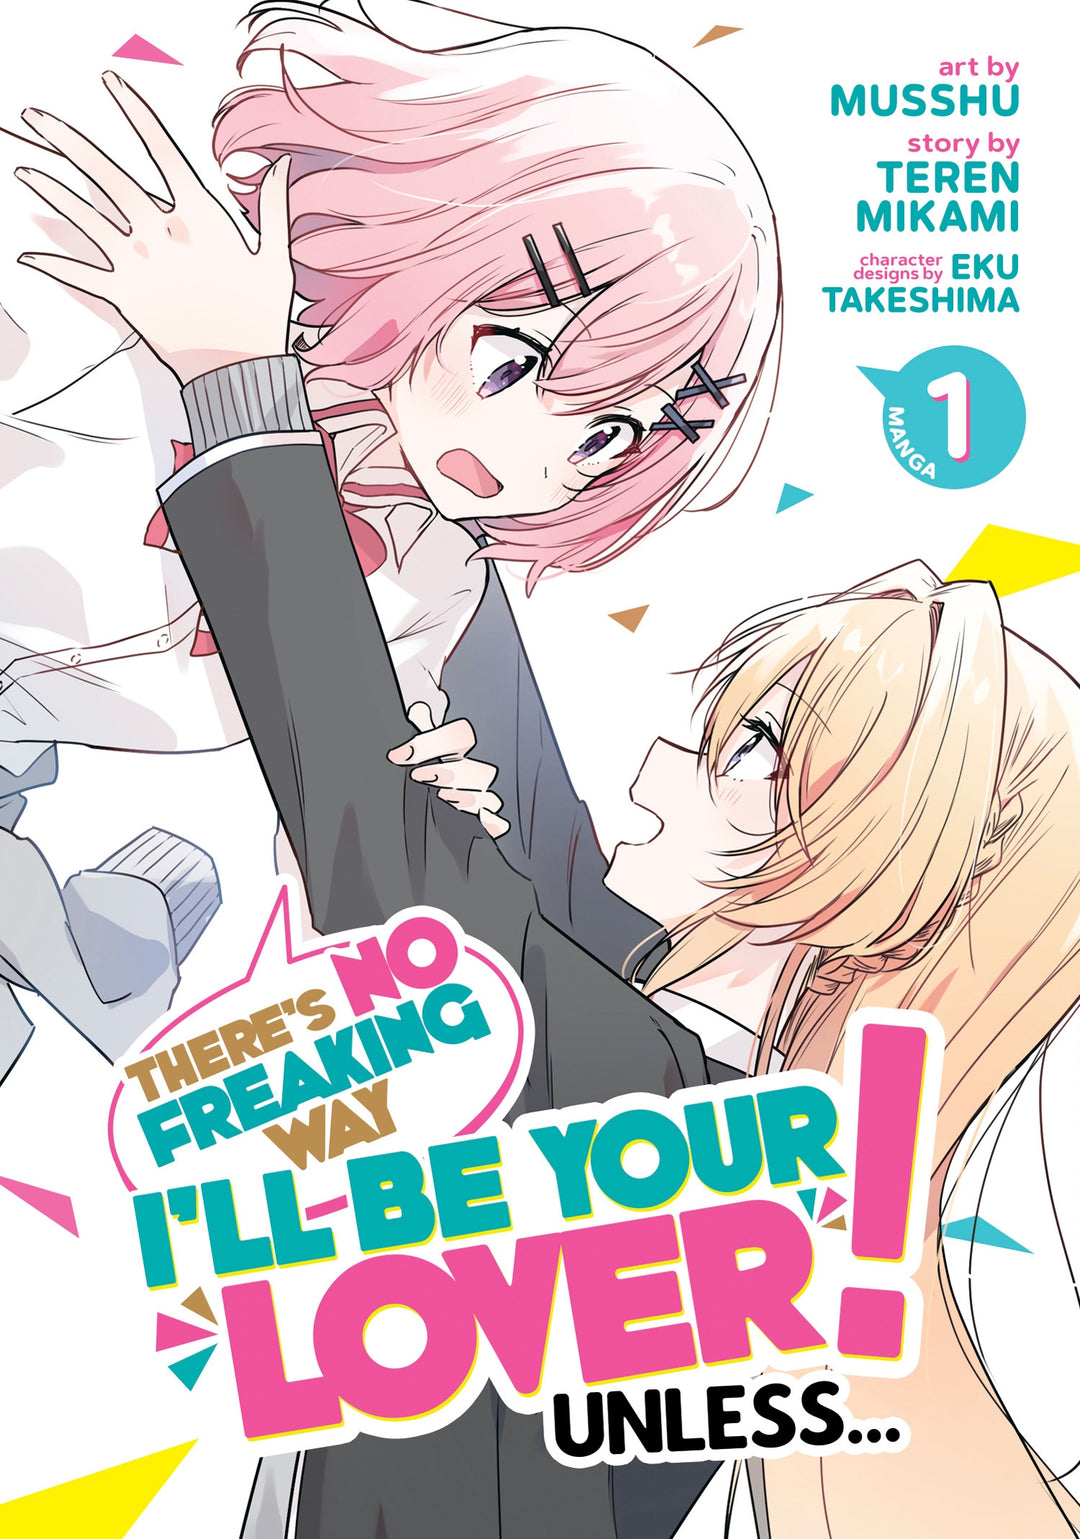 There's No Freaking Way I'll Be Your Lover! Unless... (Manga), Vol. 01